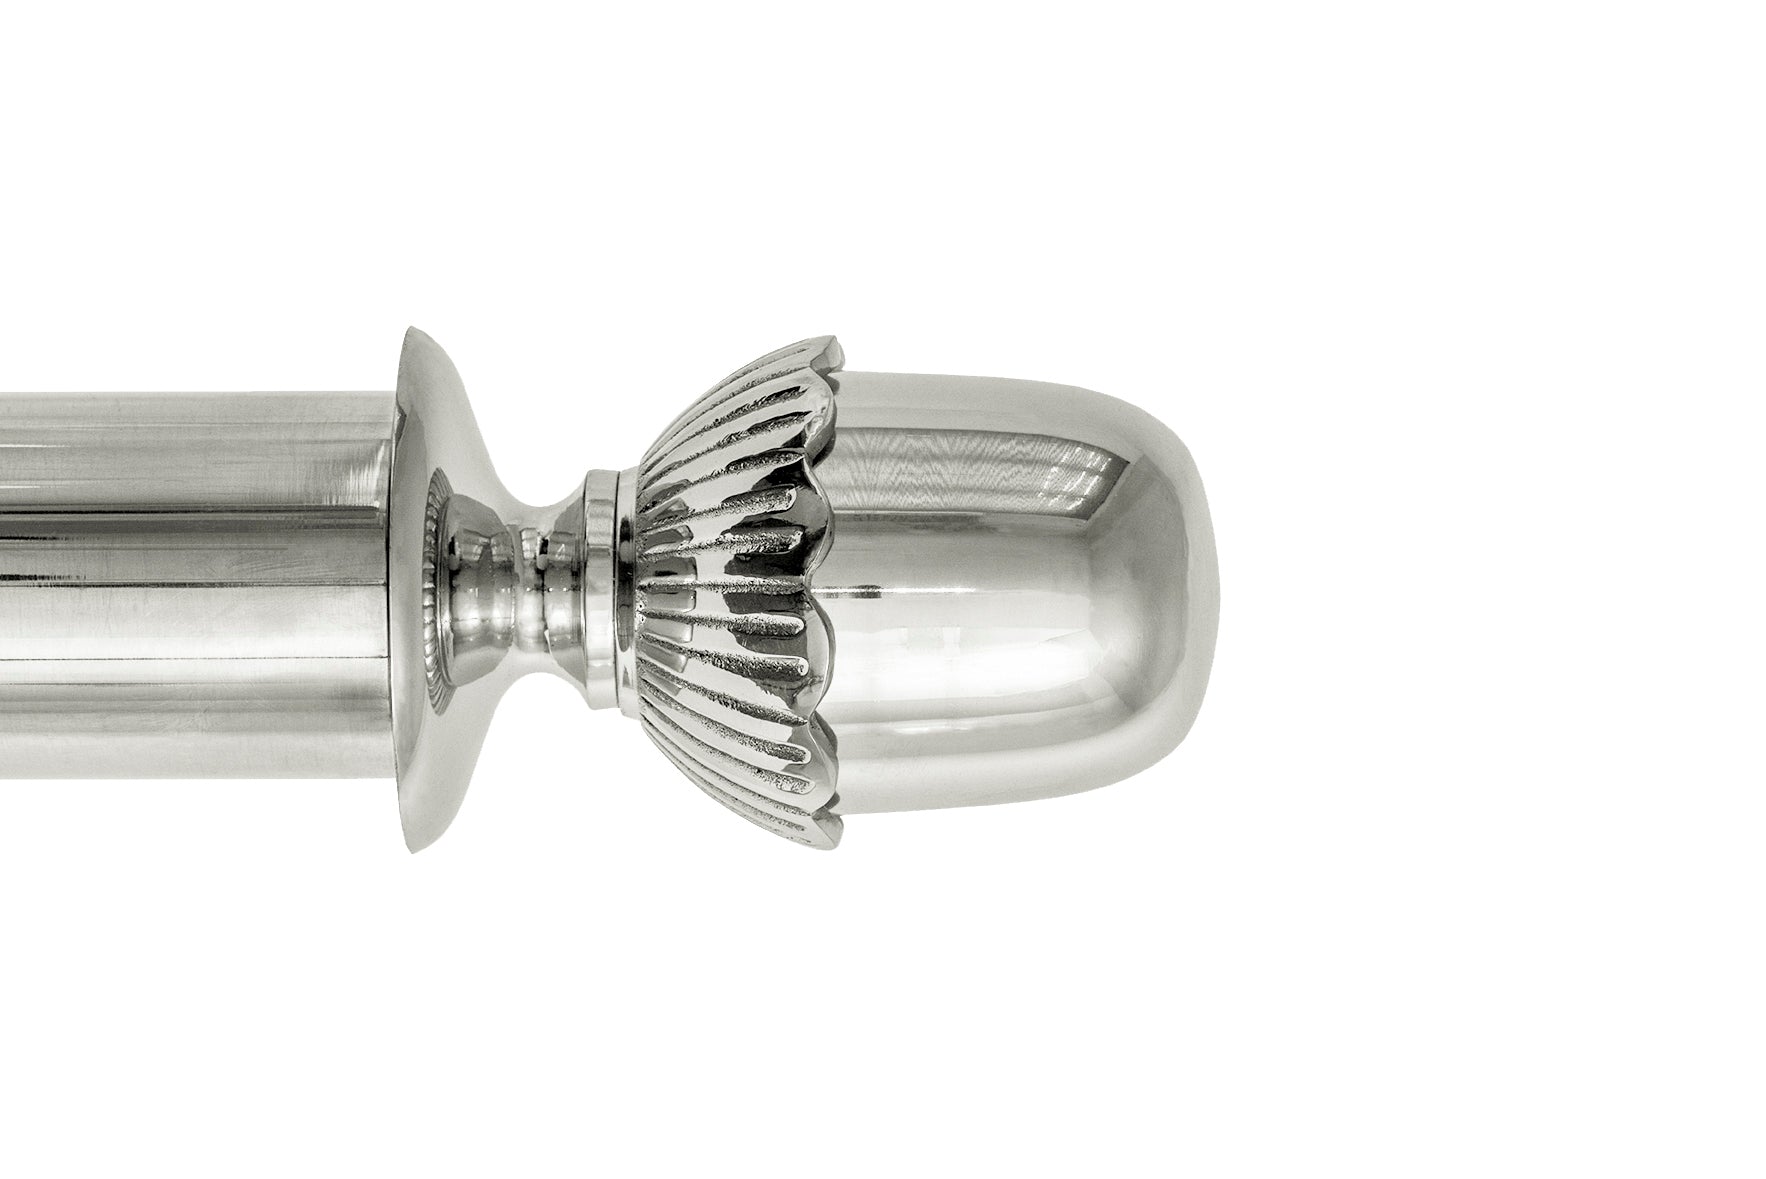 Tillys Classic Acorn Finial Curtain Pole Set in Polished Nickel